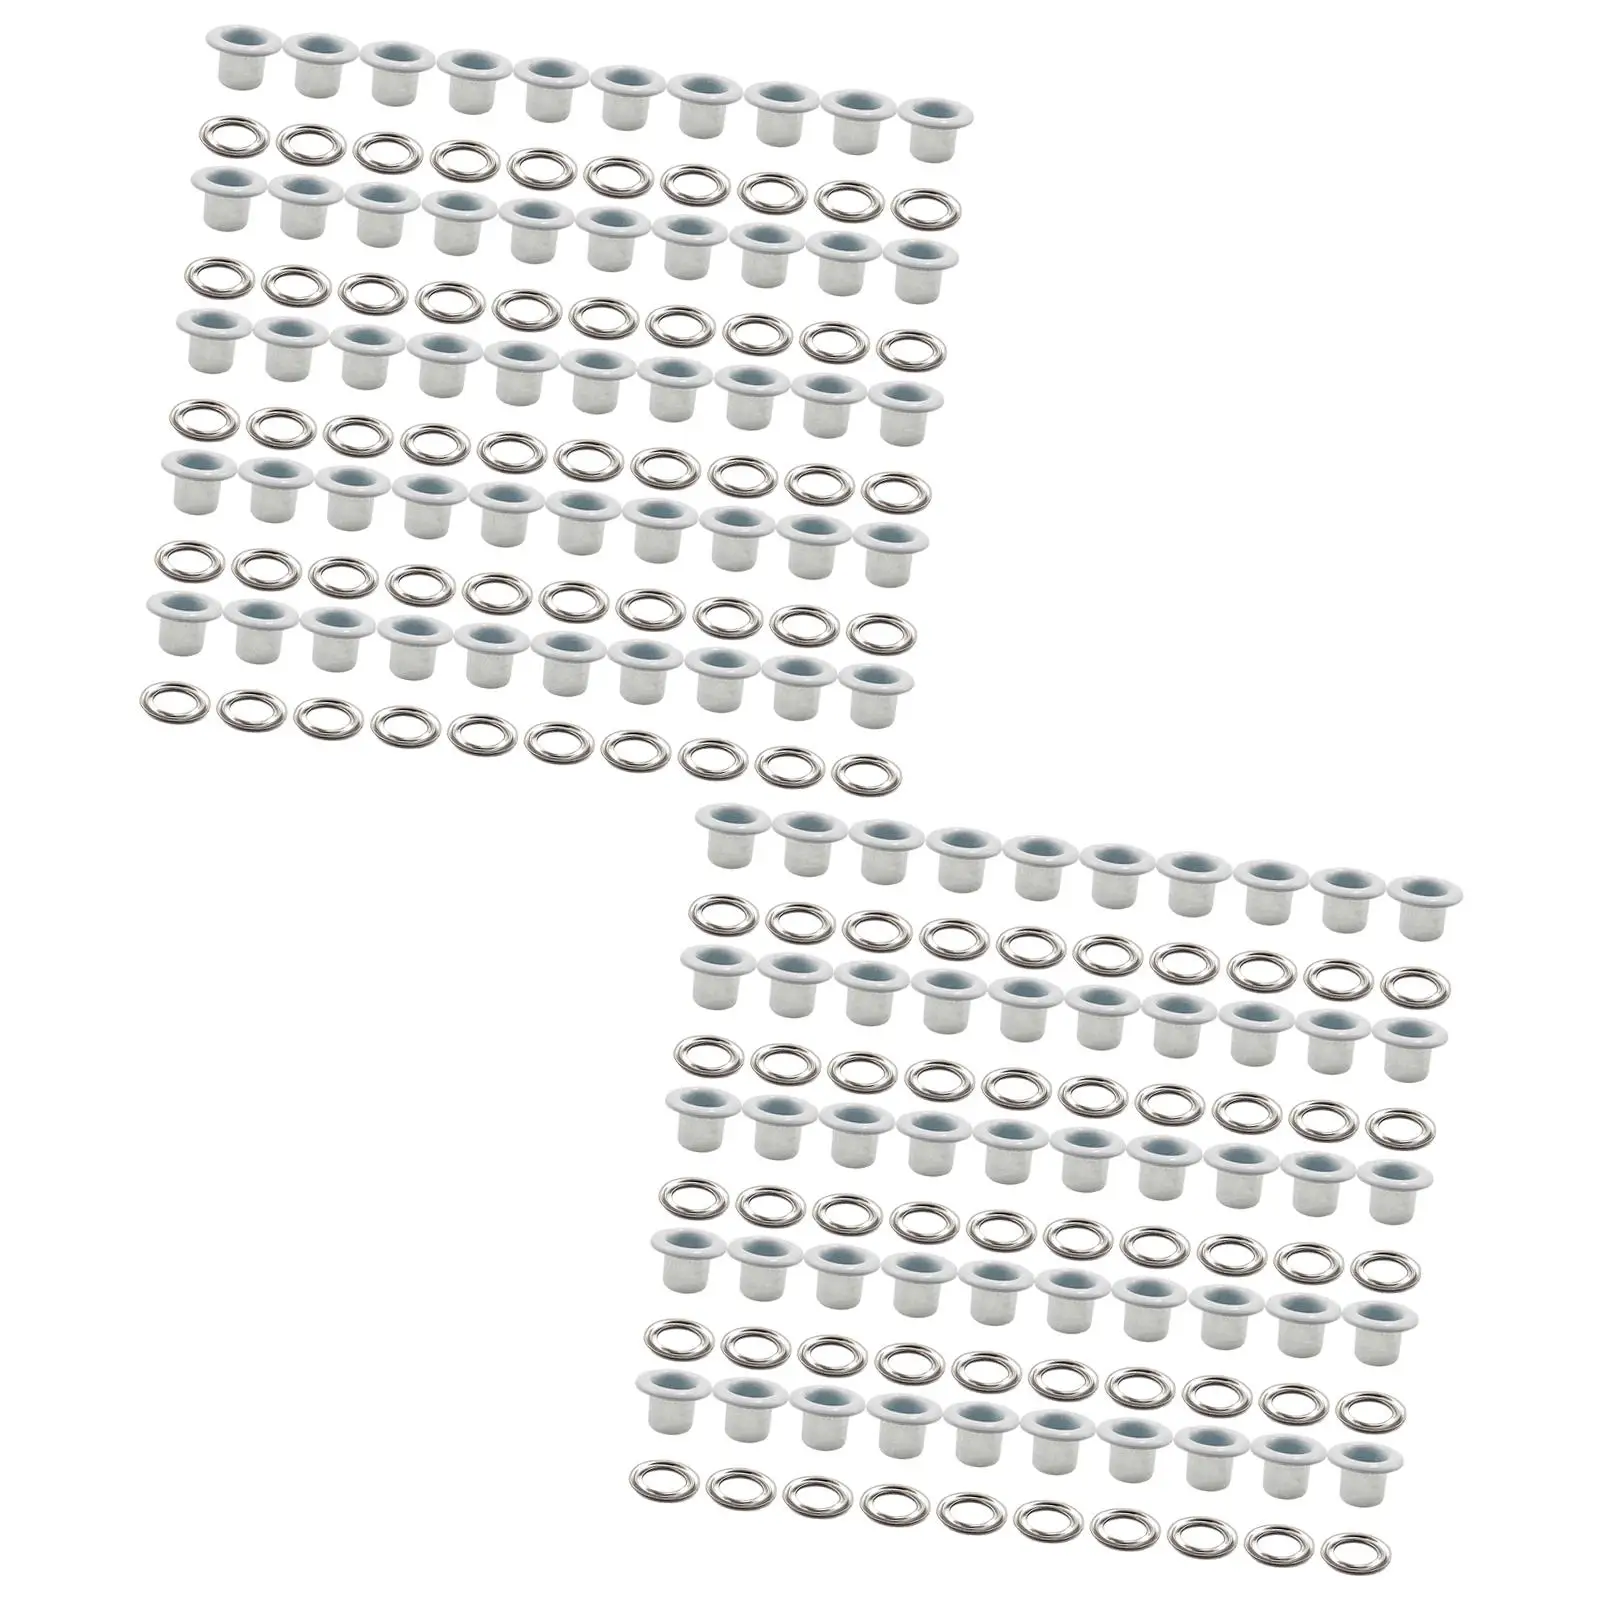 100 Pieces Grommets Metal Eyelets 6mm Multipurpose Accessories Round Shape for Hats DIY Project Belt Card Making Canvas